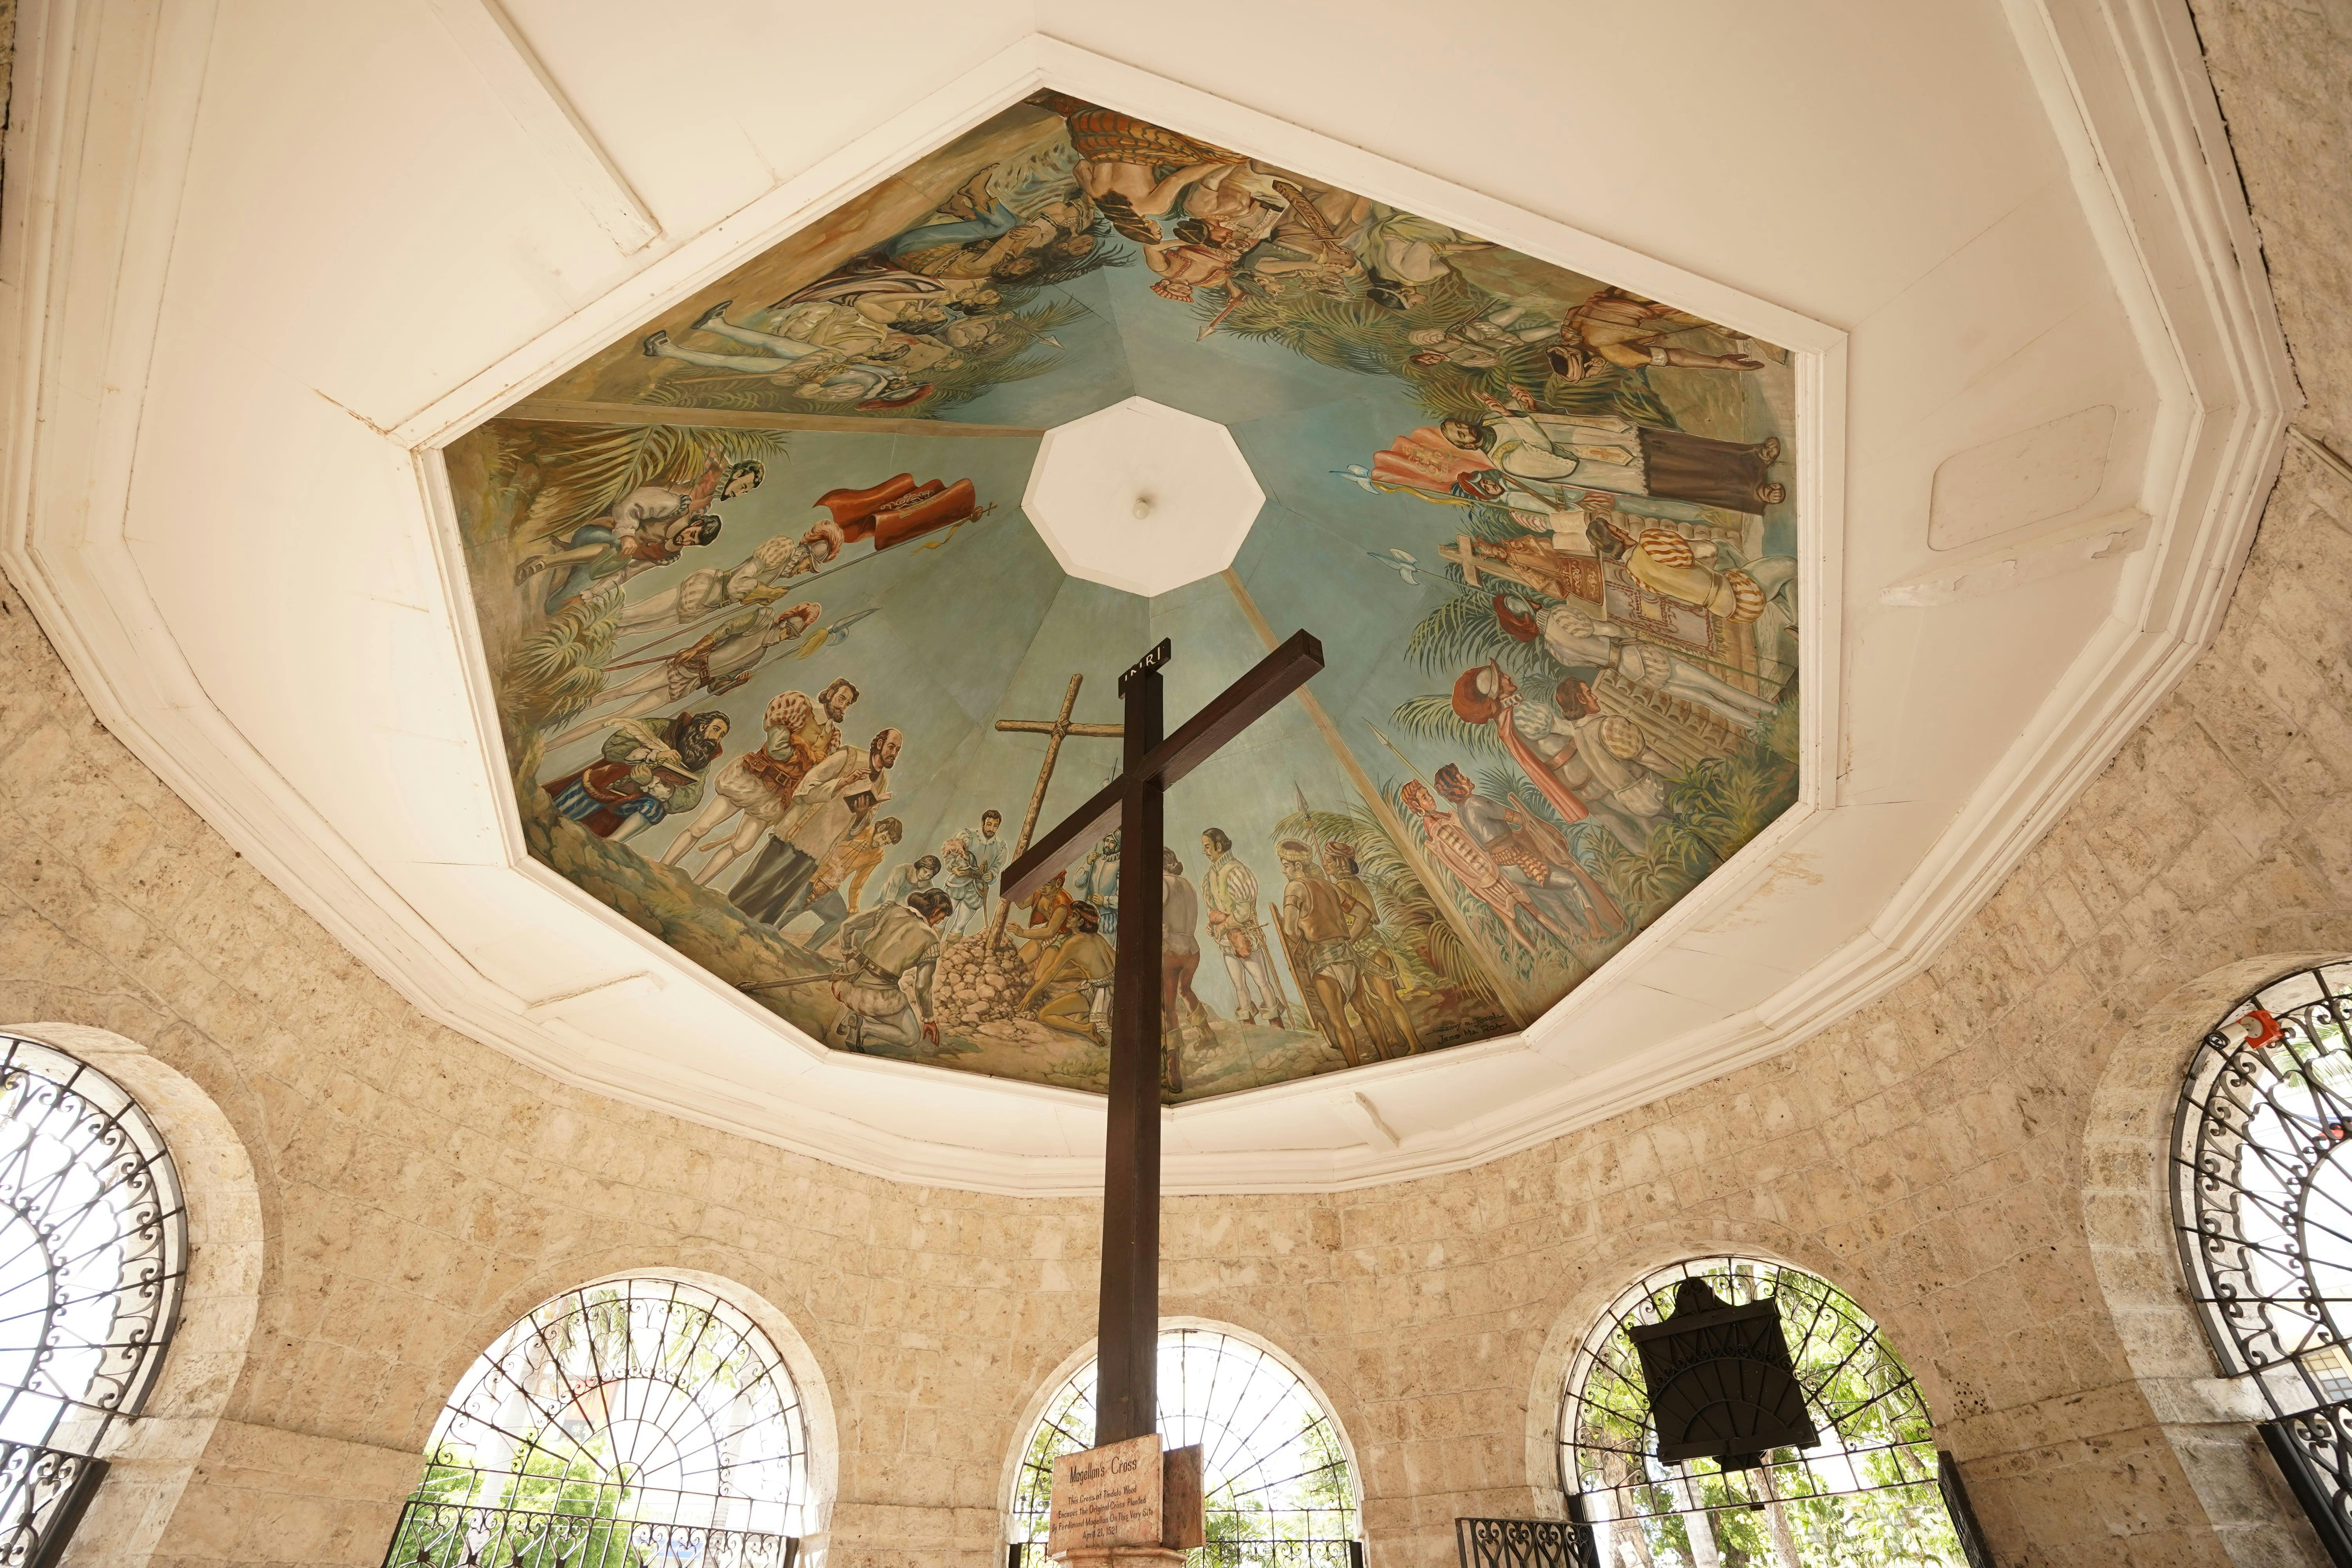 Depiction of history at the ceiling of Magellan's Cross